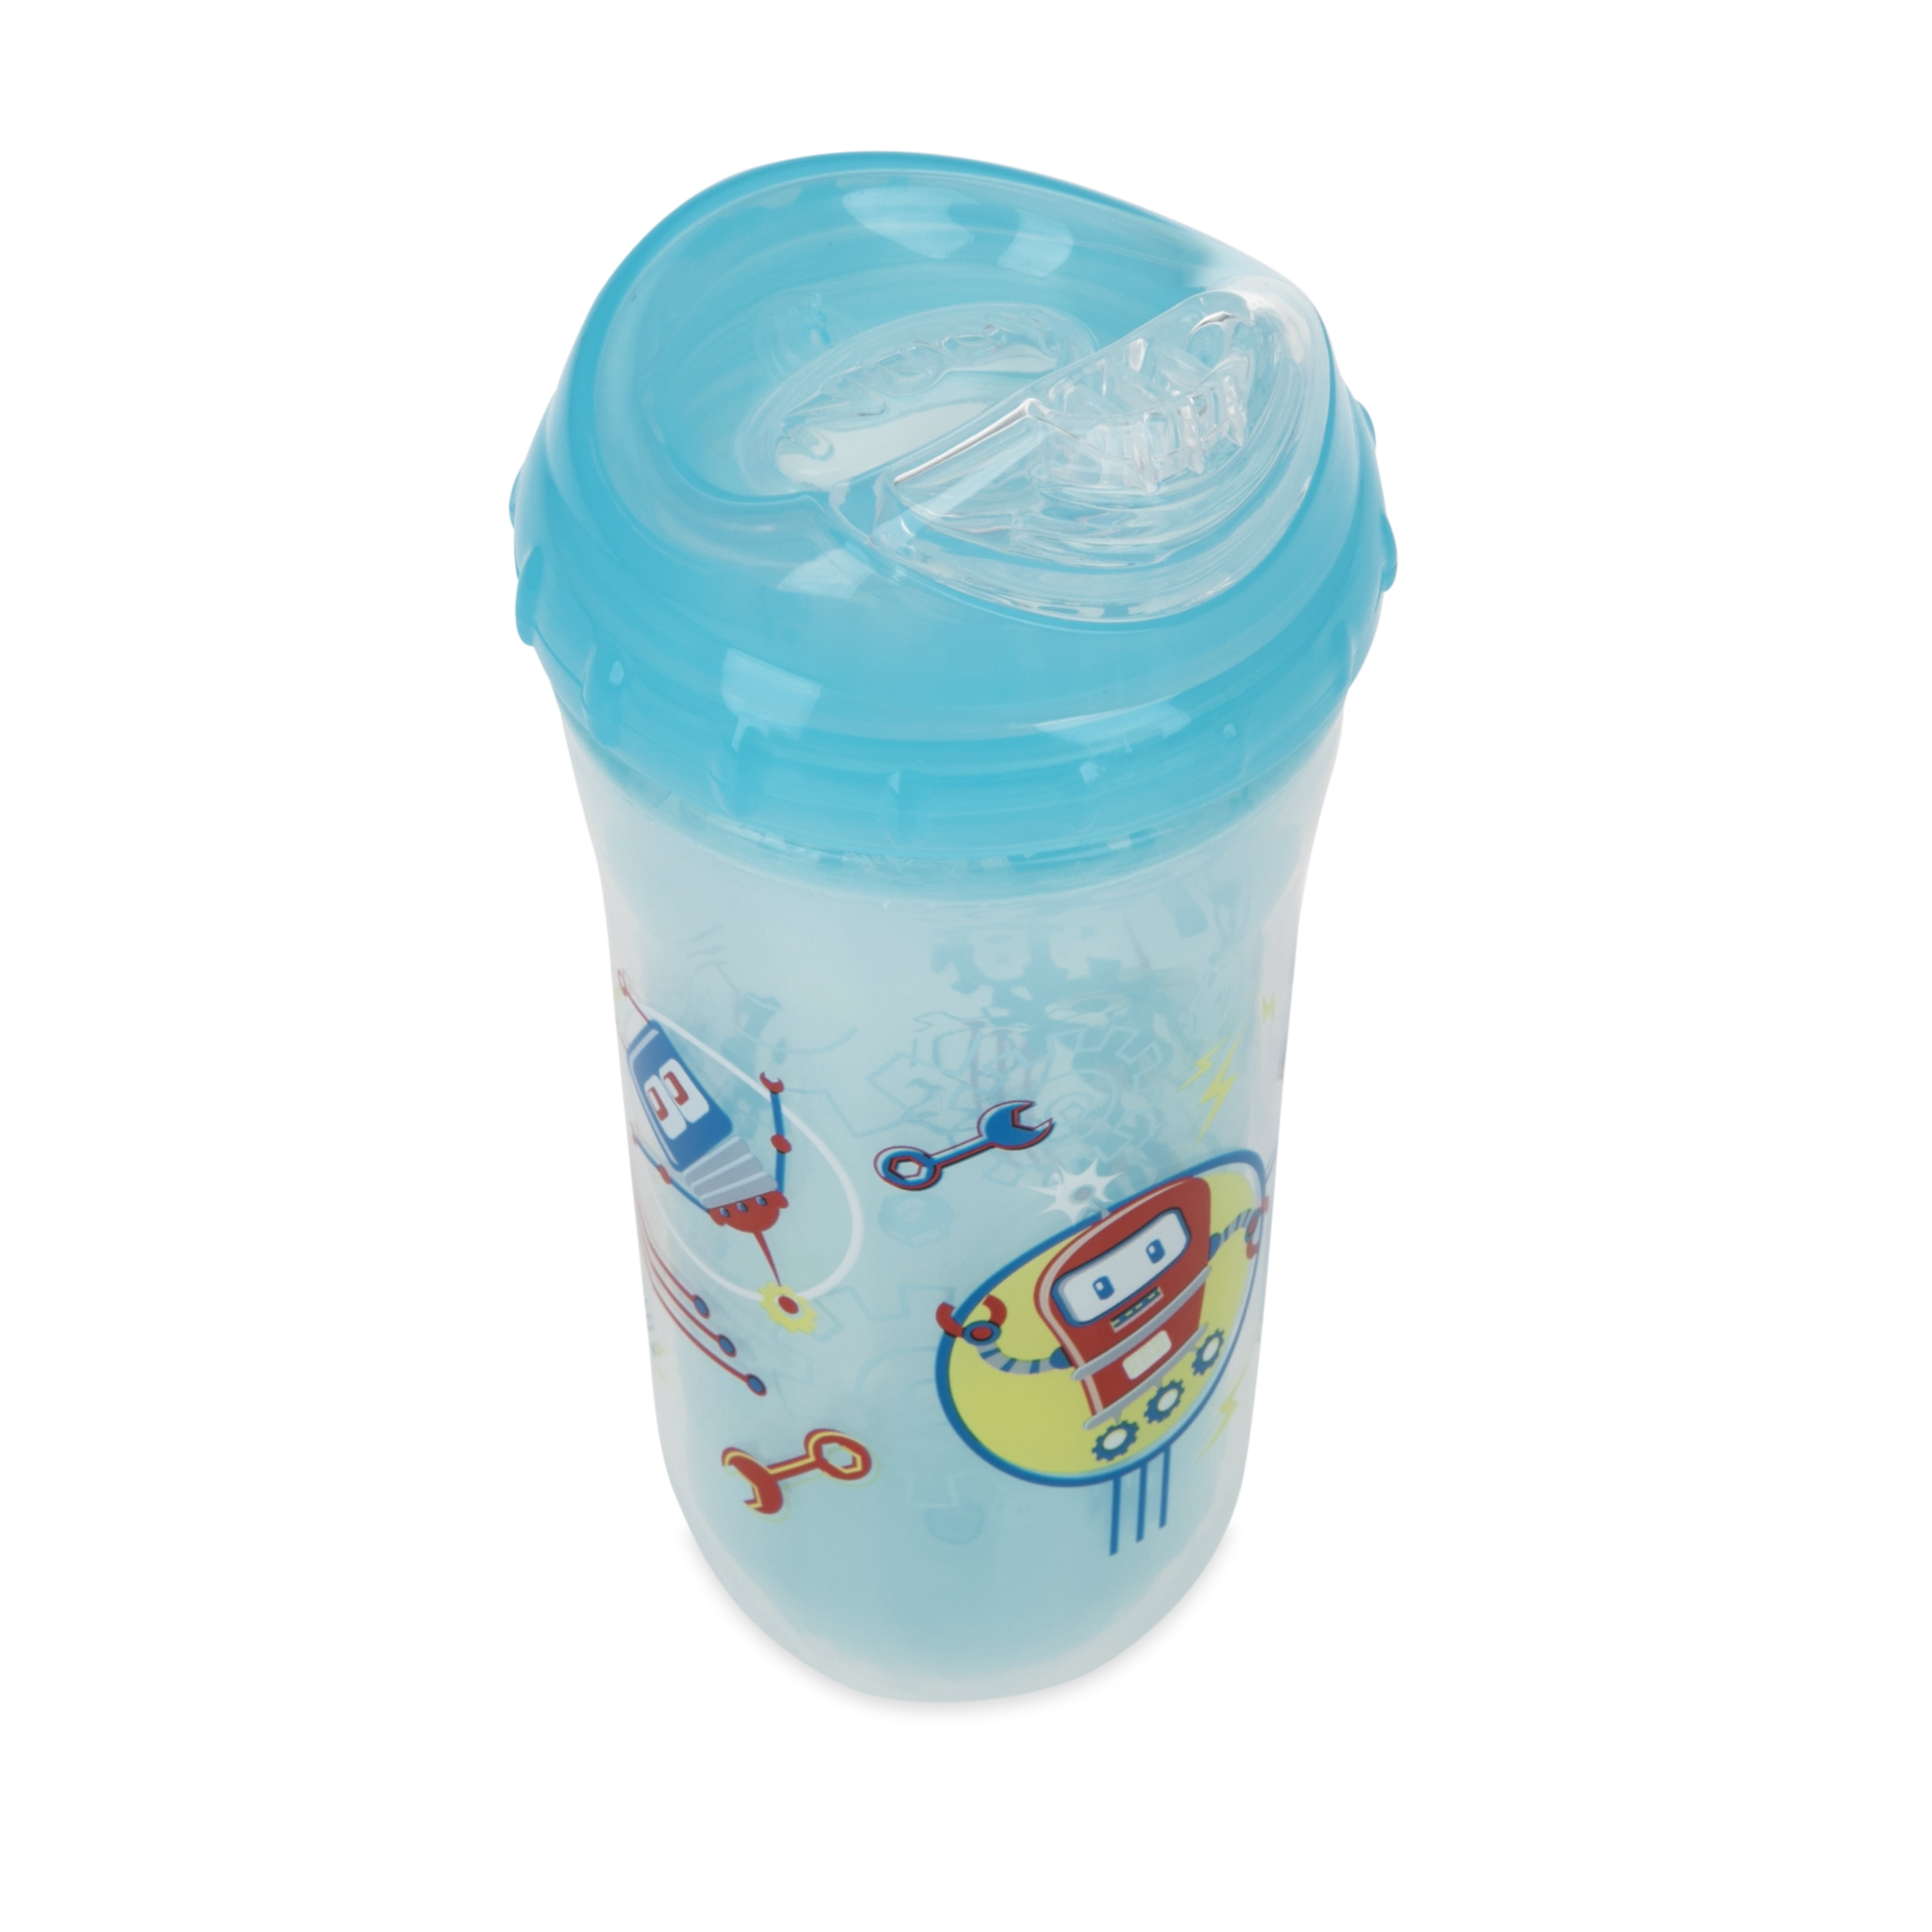 Nuby No-Spill Cup with Dual-Flo Valve, Sippy Cup for Baby and Toddler, 9  Ounce, Color May Vary (Pack…See more Nuby No-Spill Cup with Dual-Flo Valve